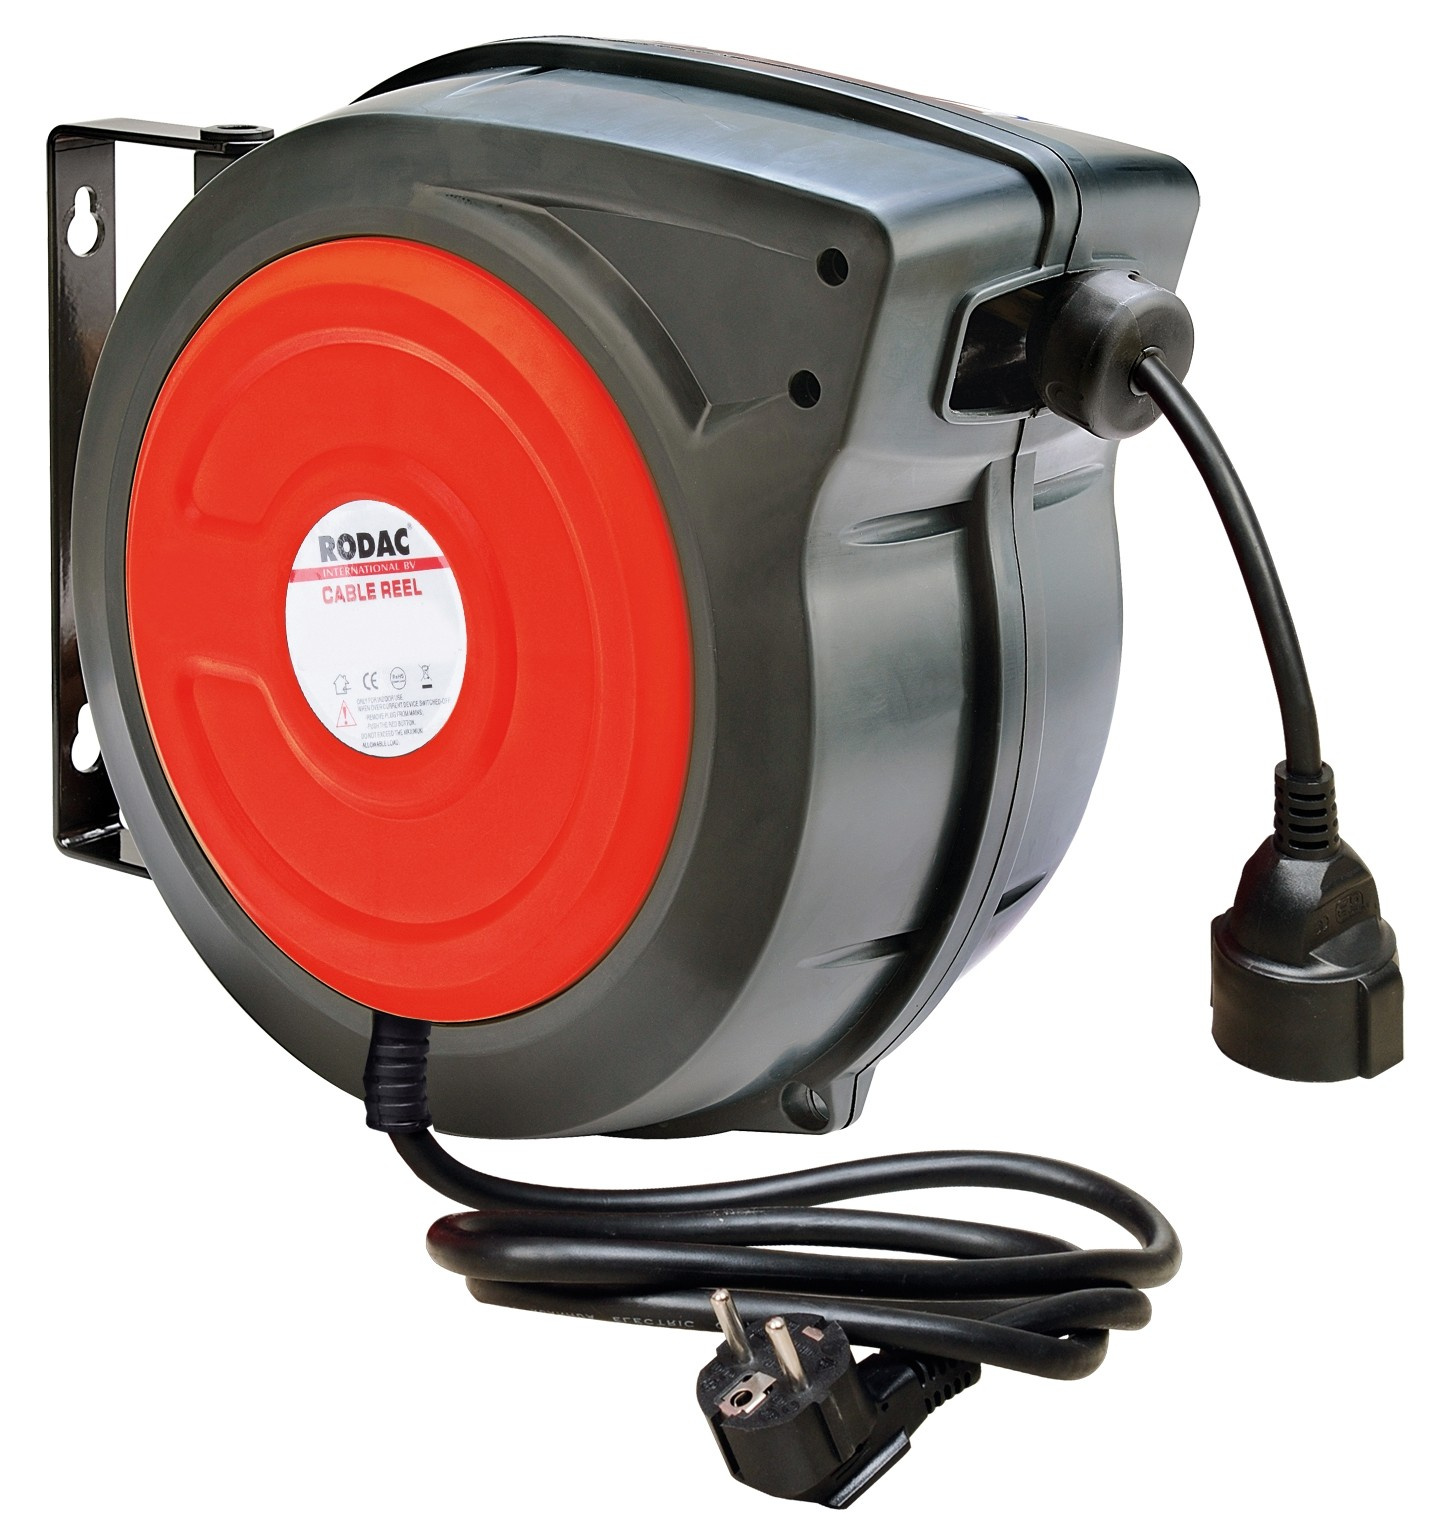 Retractable Power Cable Reel 15m for Electrical Tools EU fittings